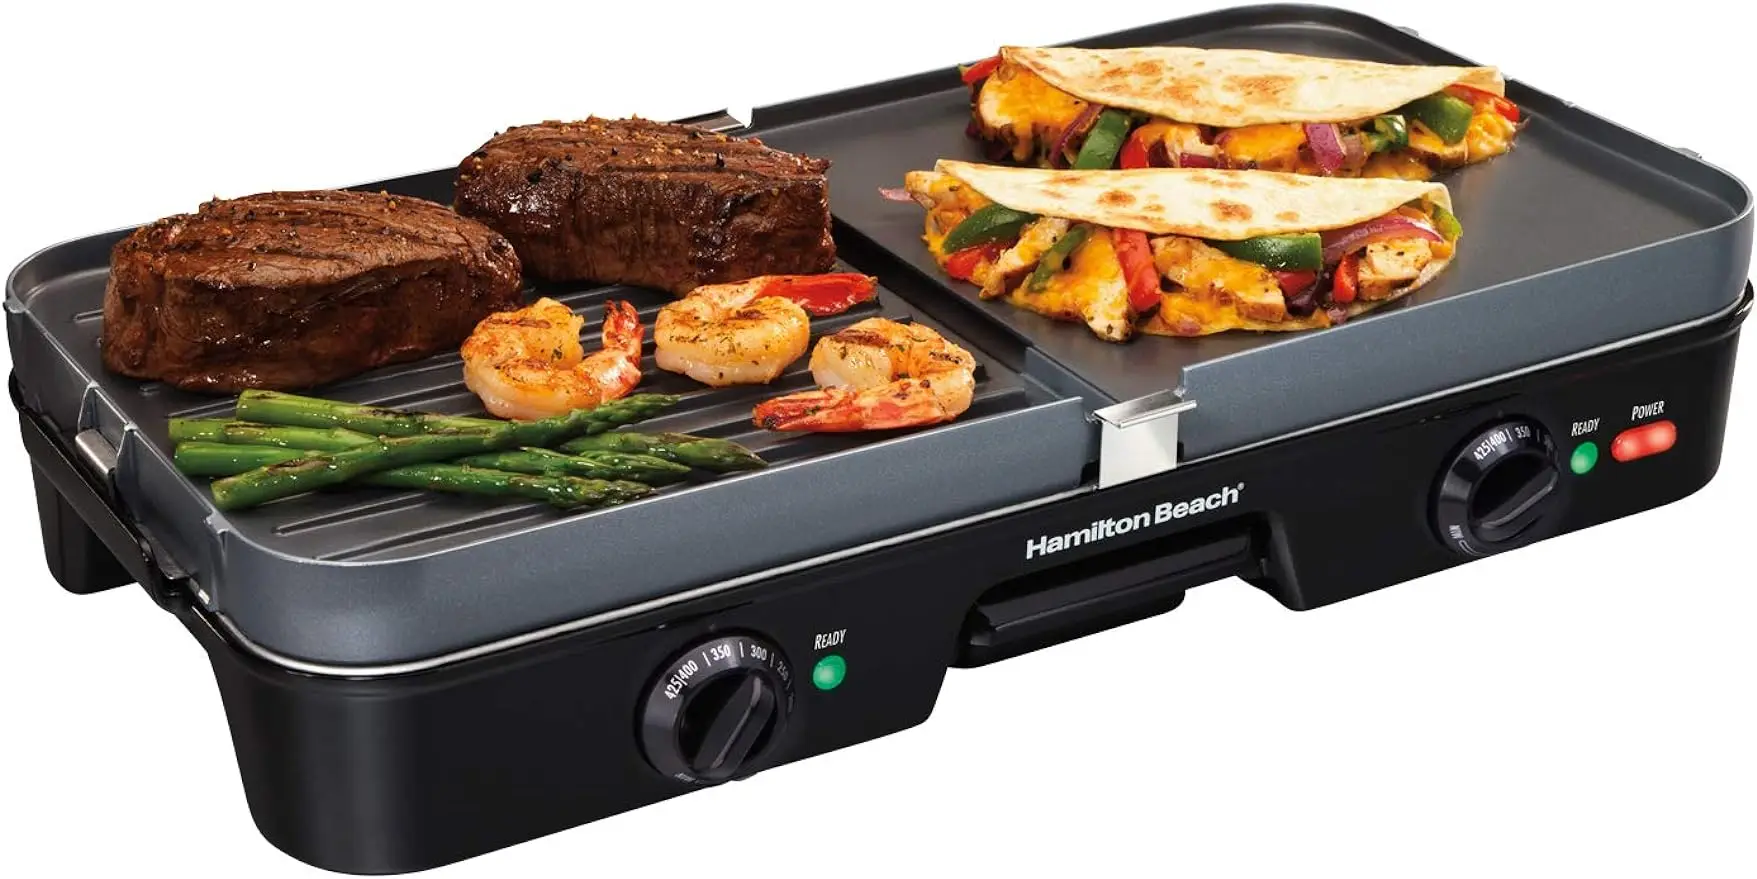 

3-in-1 Electric Indoor Grill + Griddle,8-Serving, Reversible Nonstick Plates,2 Cooking Zones with Adjustable Temperature (38546)